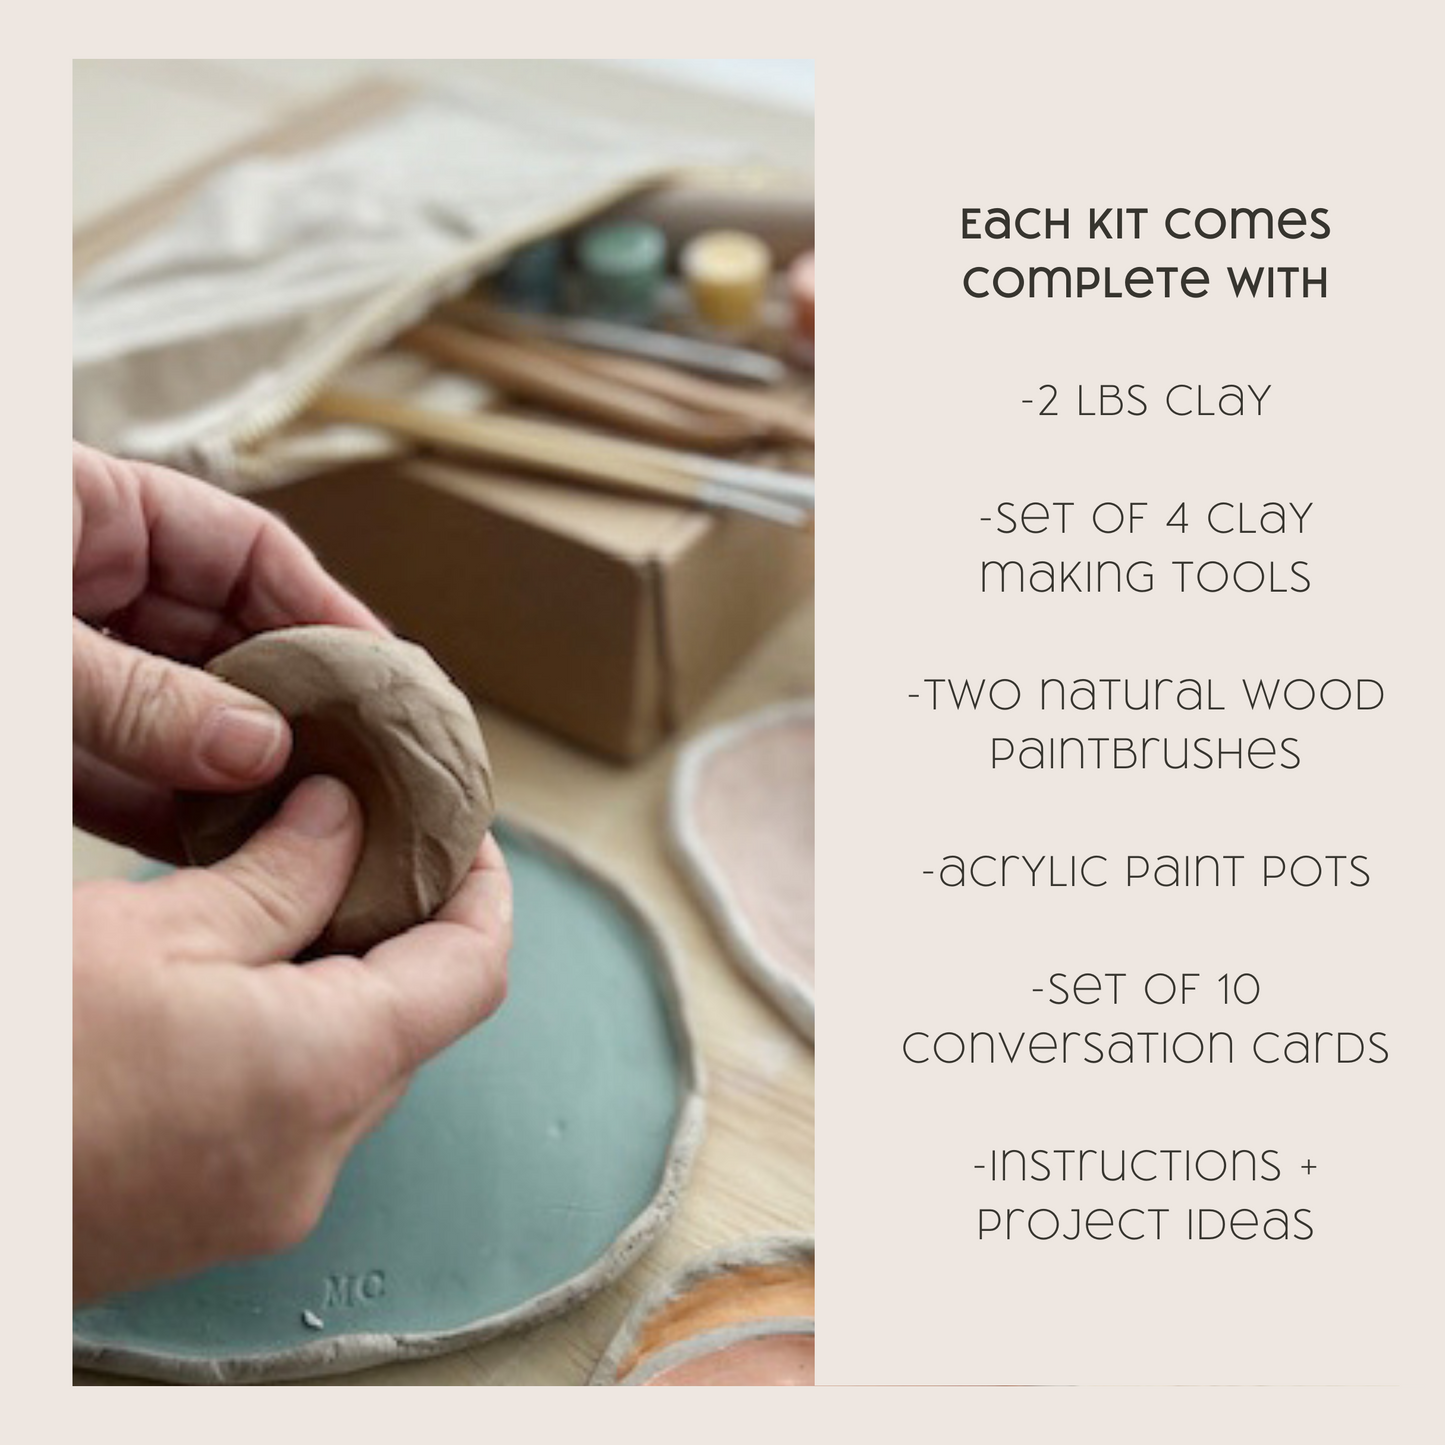 Clay kit contents with photo of clay kit. 